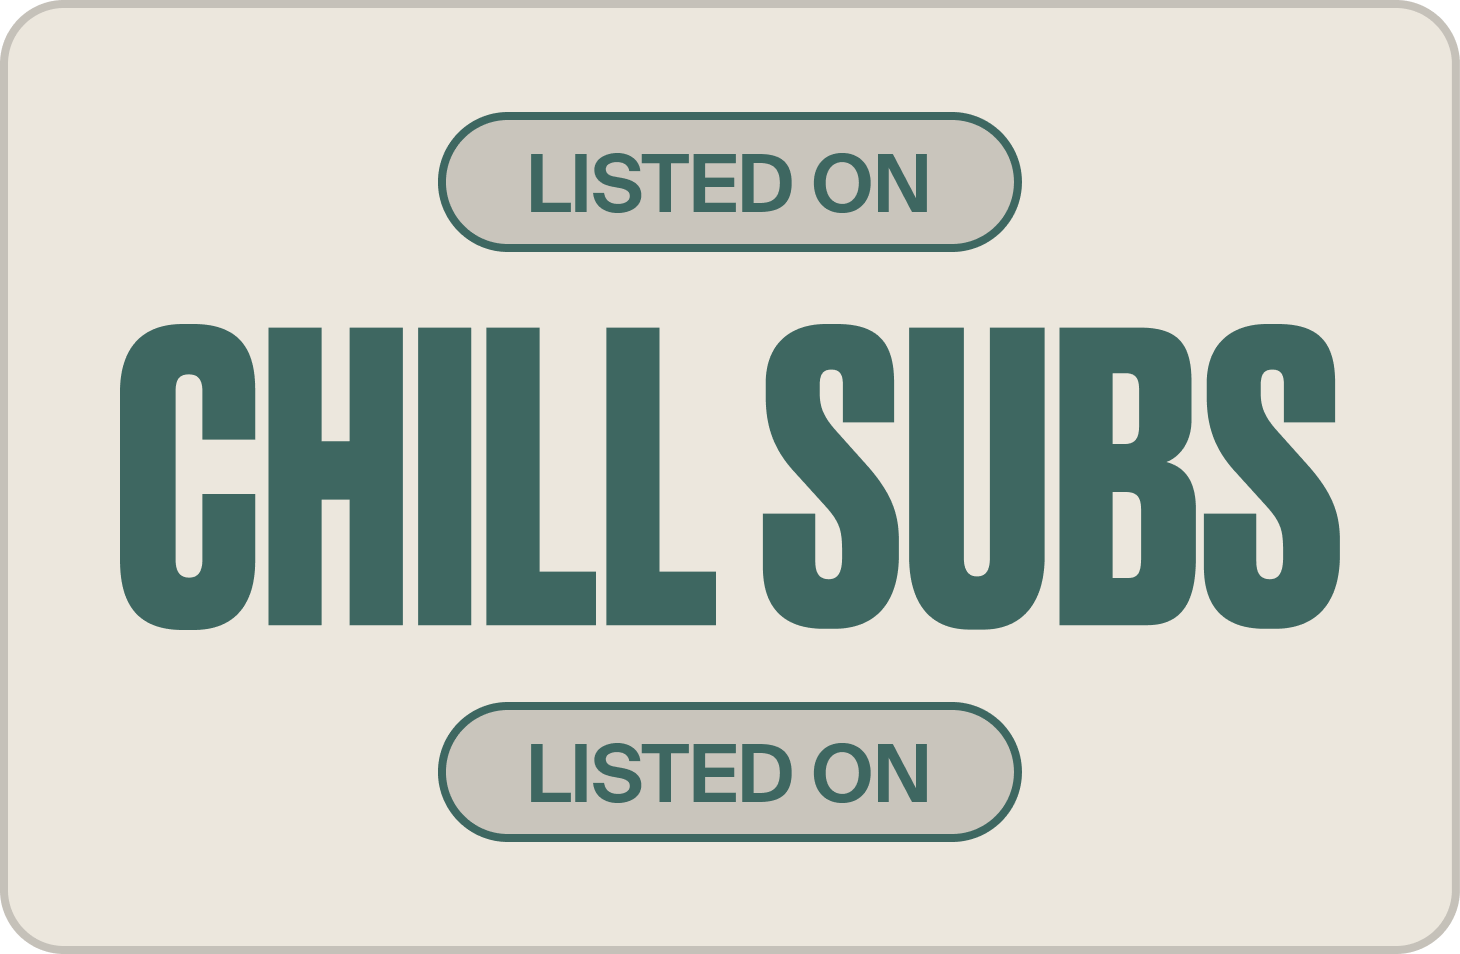 Sticker for literary magazines listed on Chill Subs. Has a Chill Subs logo on it and two "listed on" labels on top and bottom.